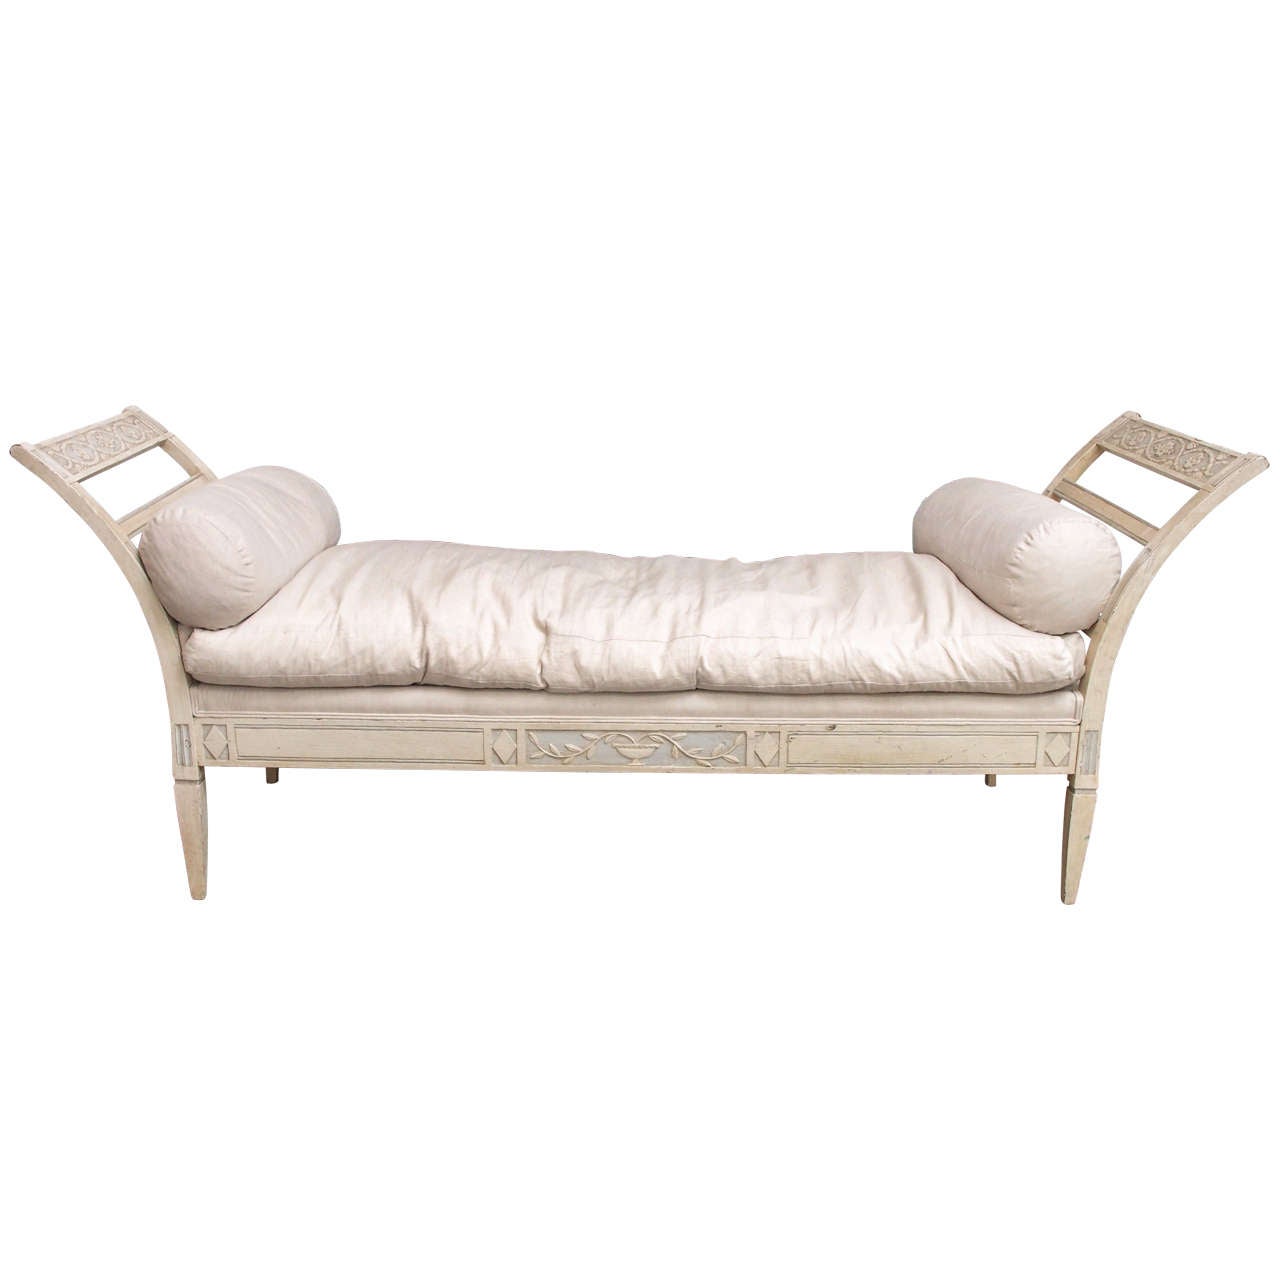 French Painted Daybed with Outscroll Arms